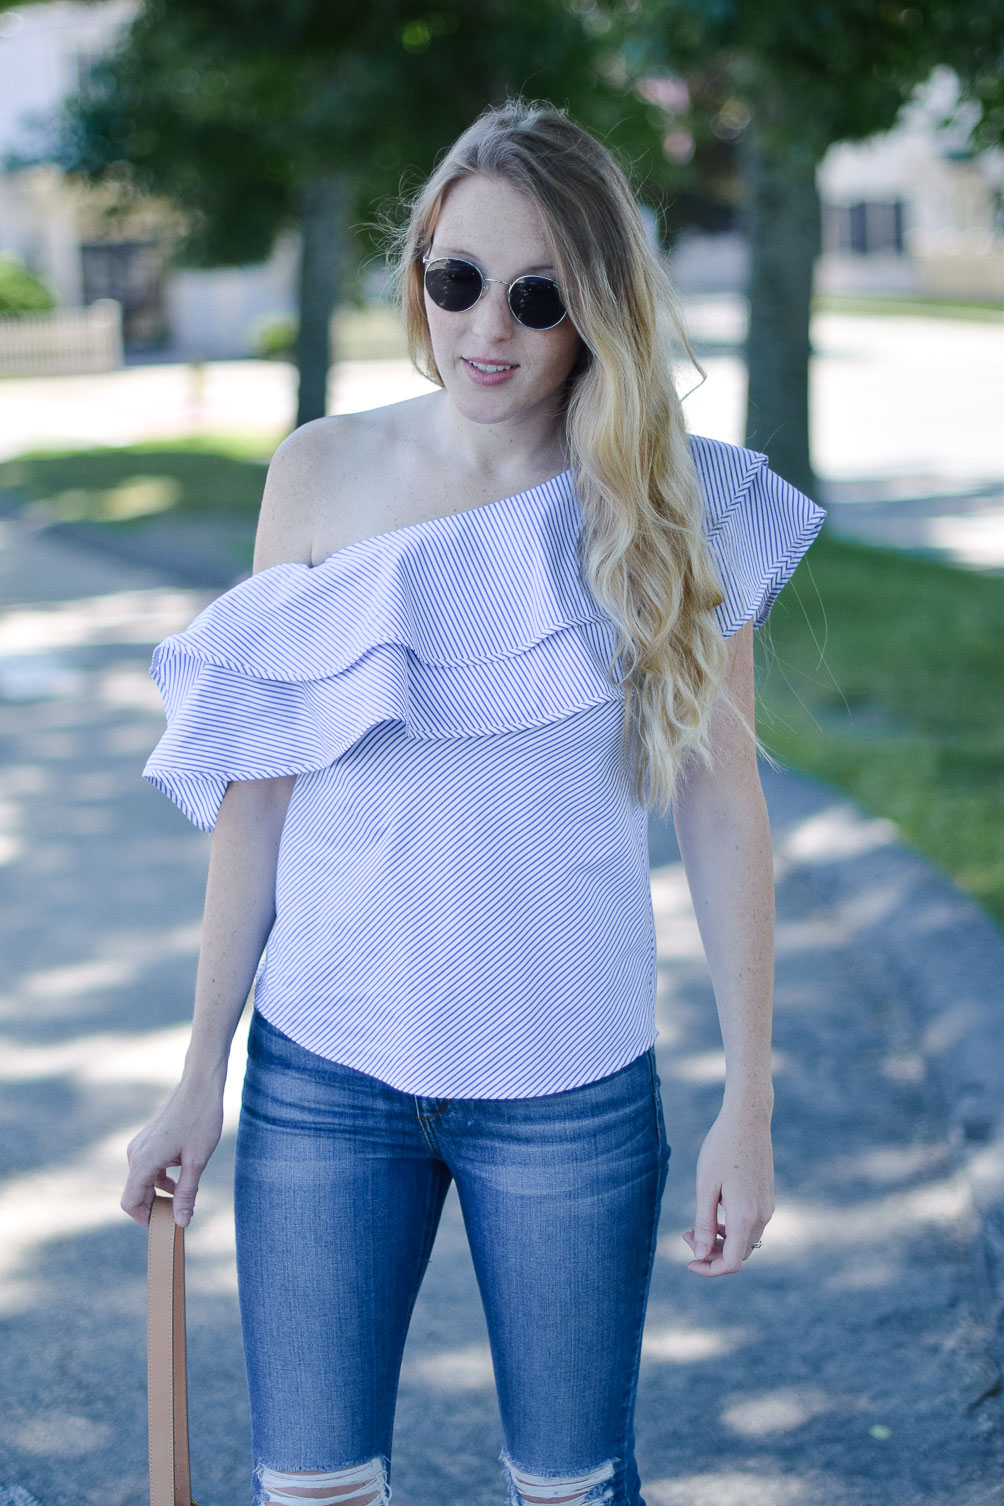 styling a summer outfit with this one shoulder ruffle top and distressed skinny jeans